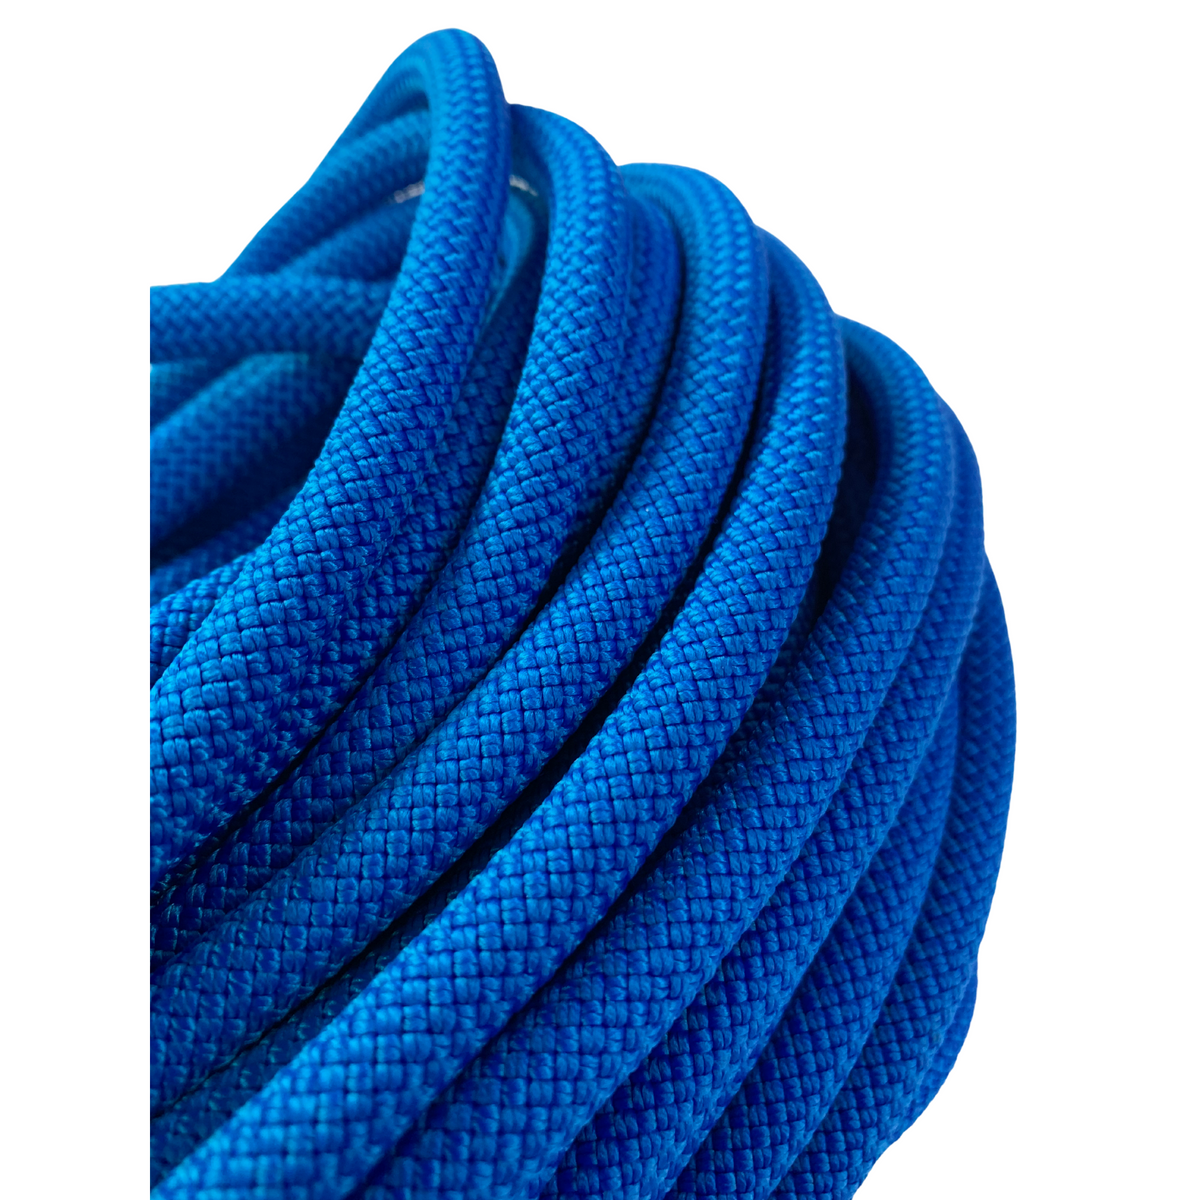 Beal Legend 8.3mm climbing rope in blue